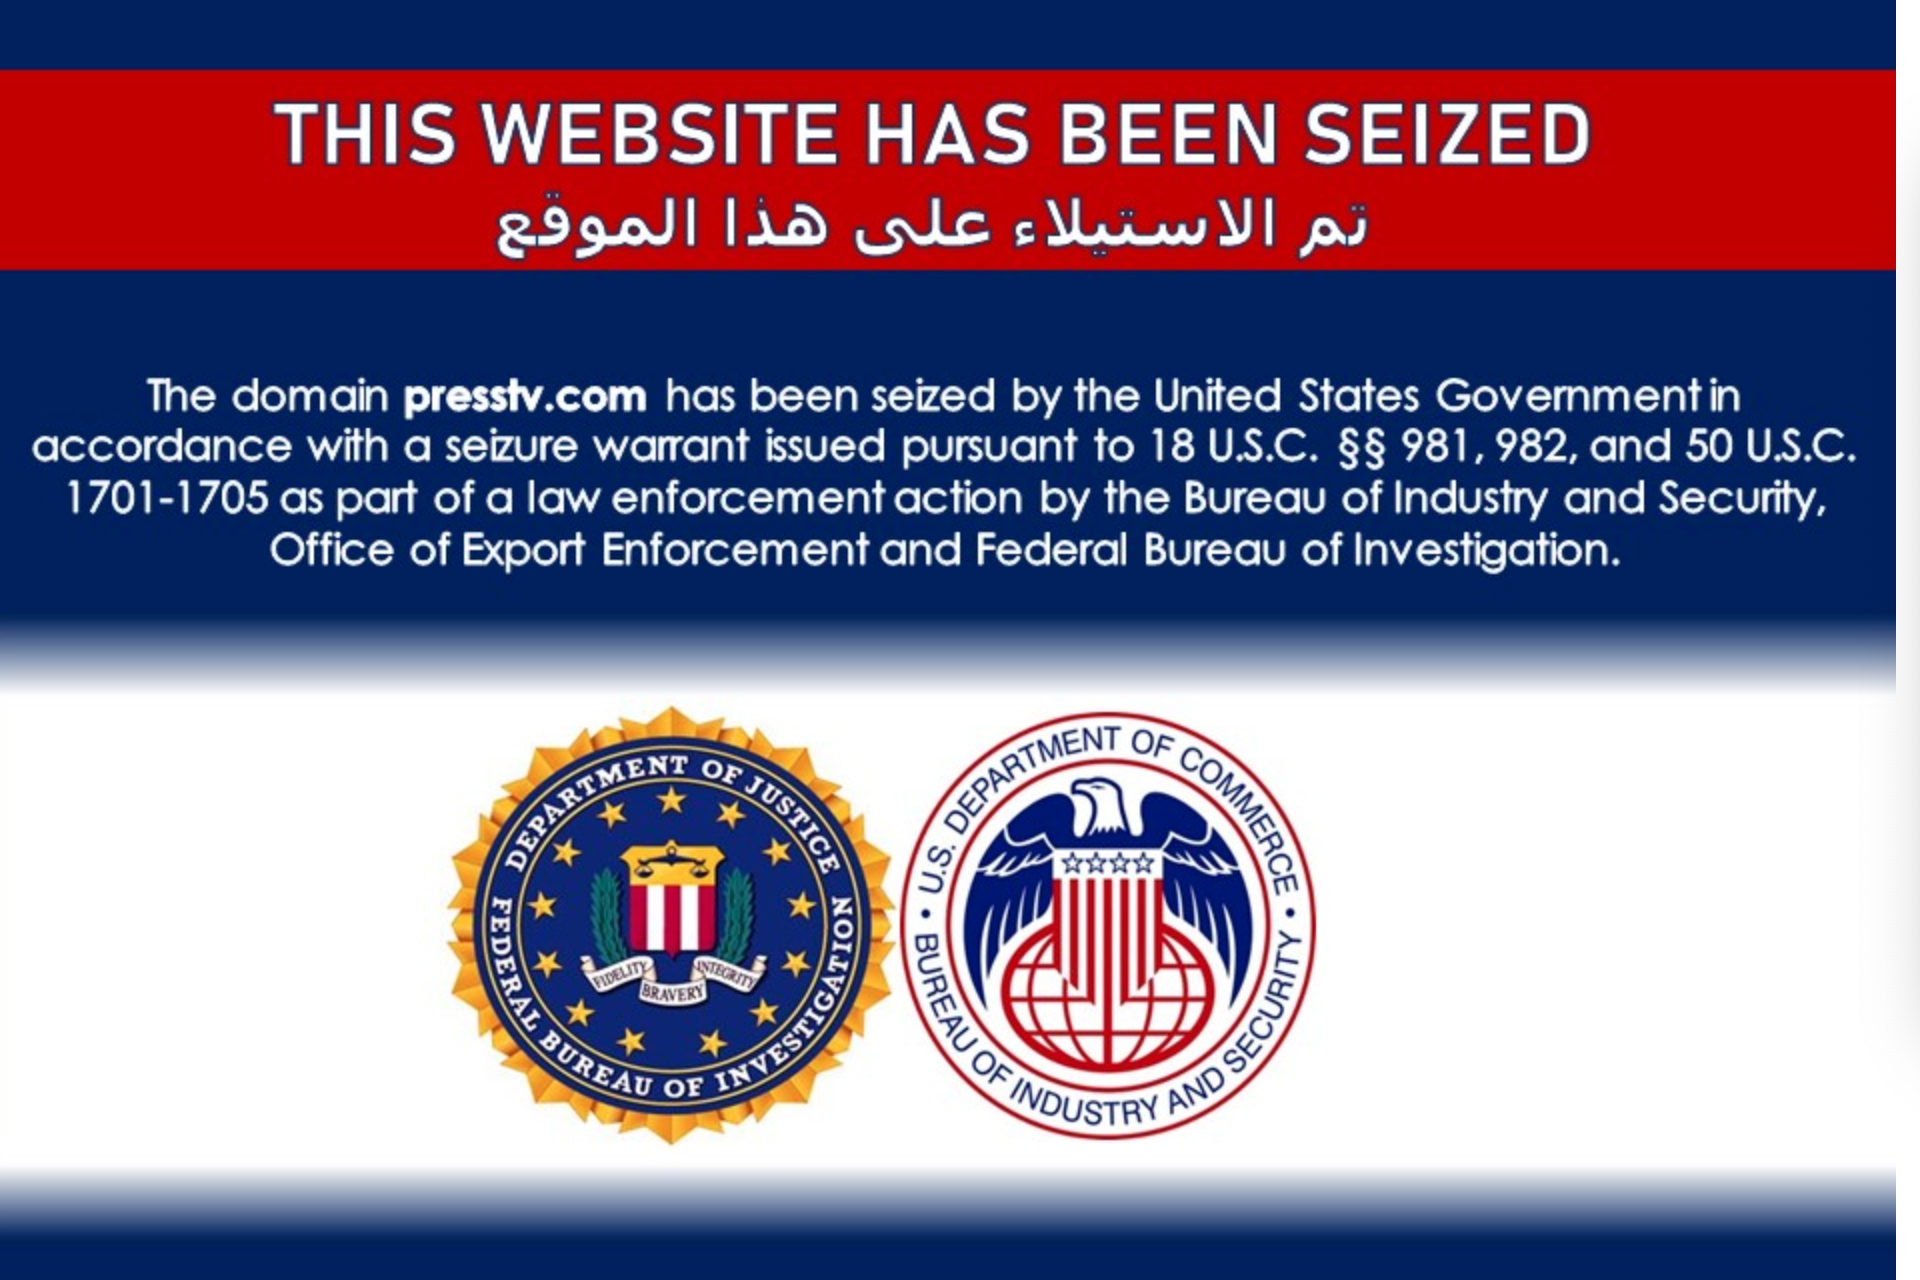 Message stating that website has been seized by the U.S. government.